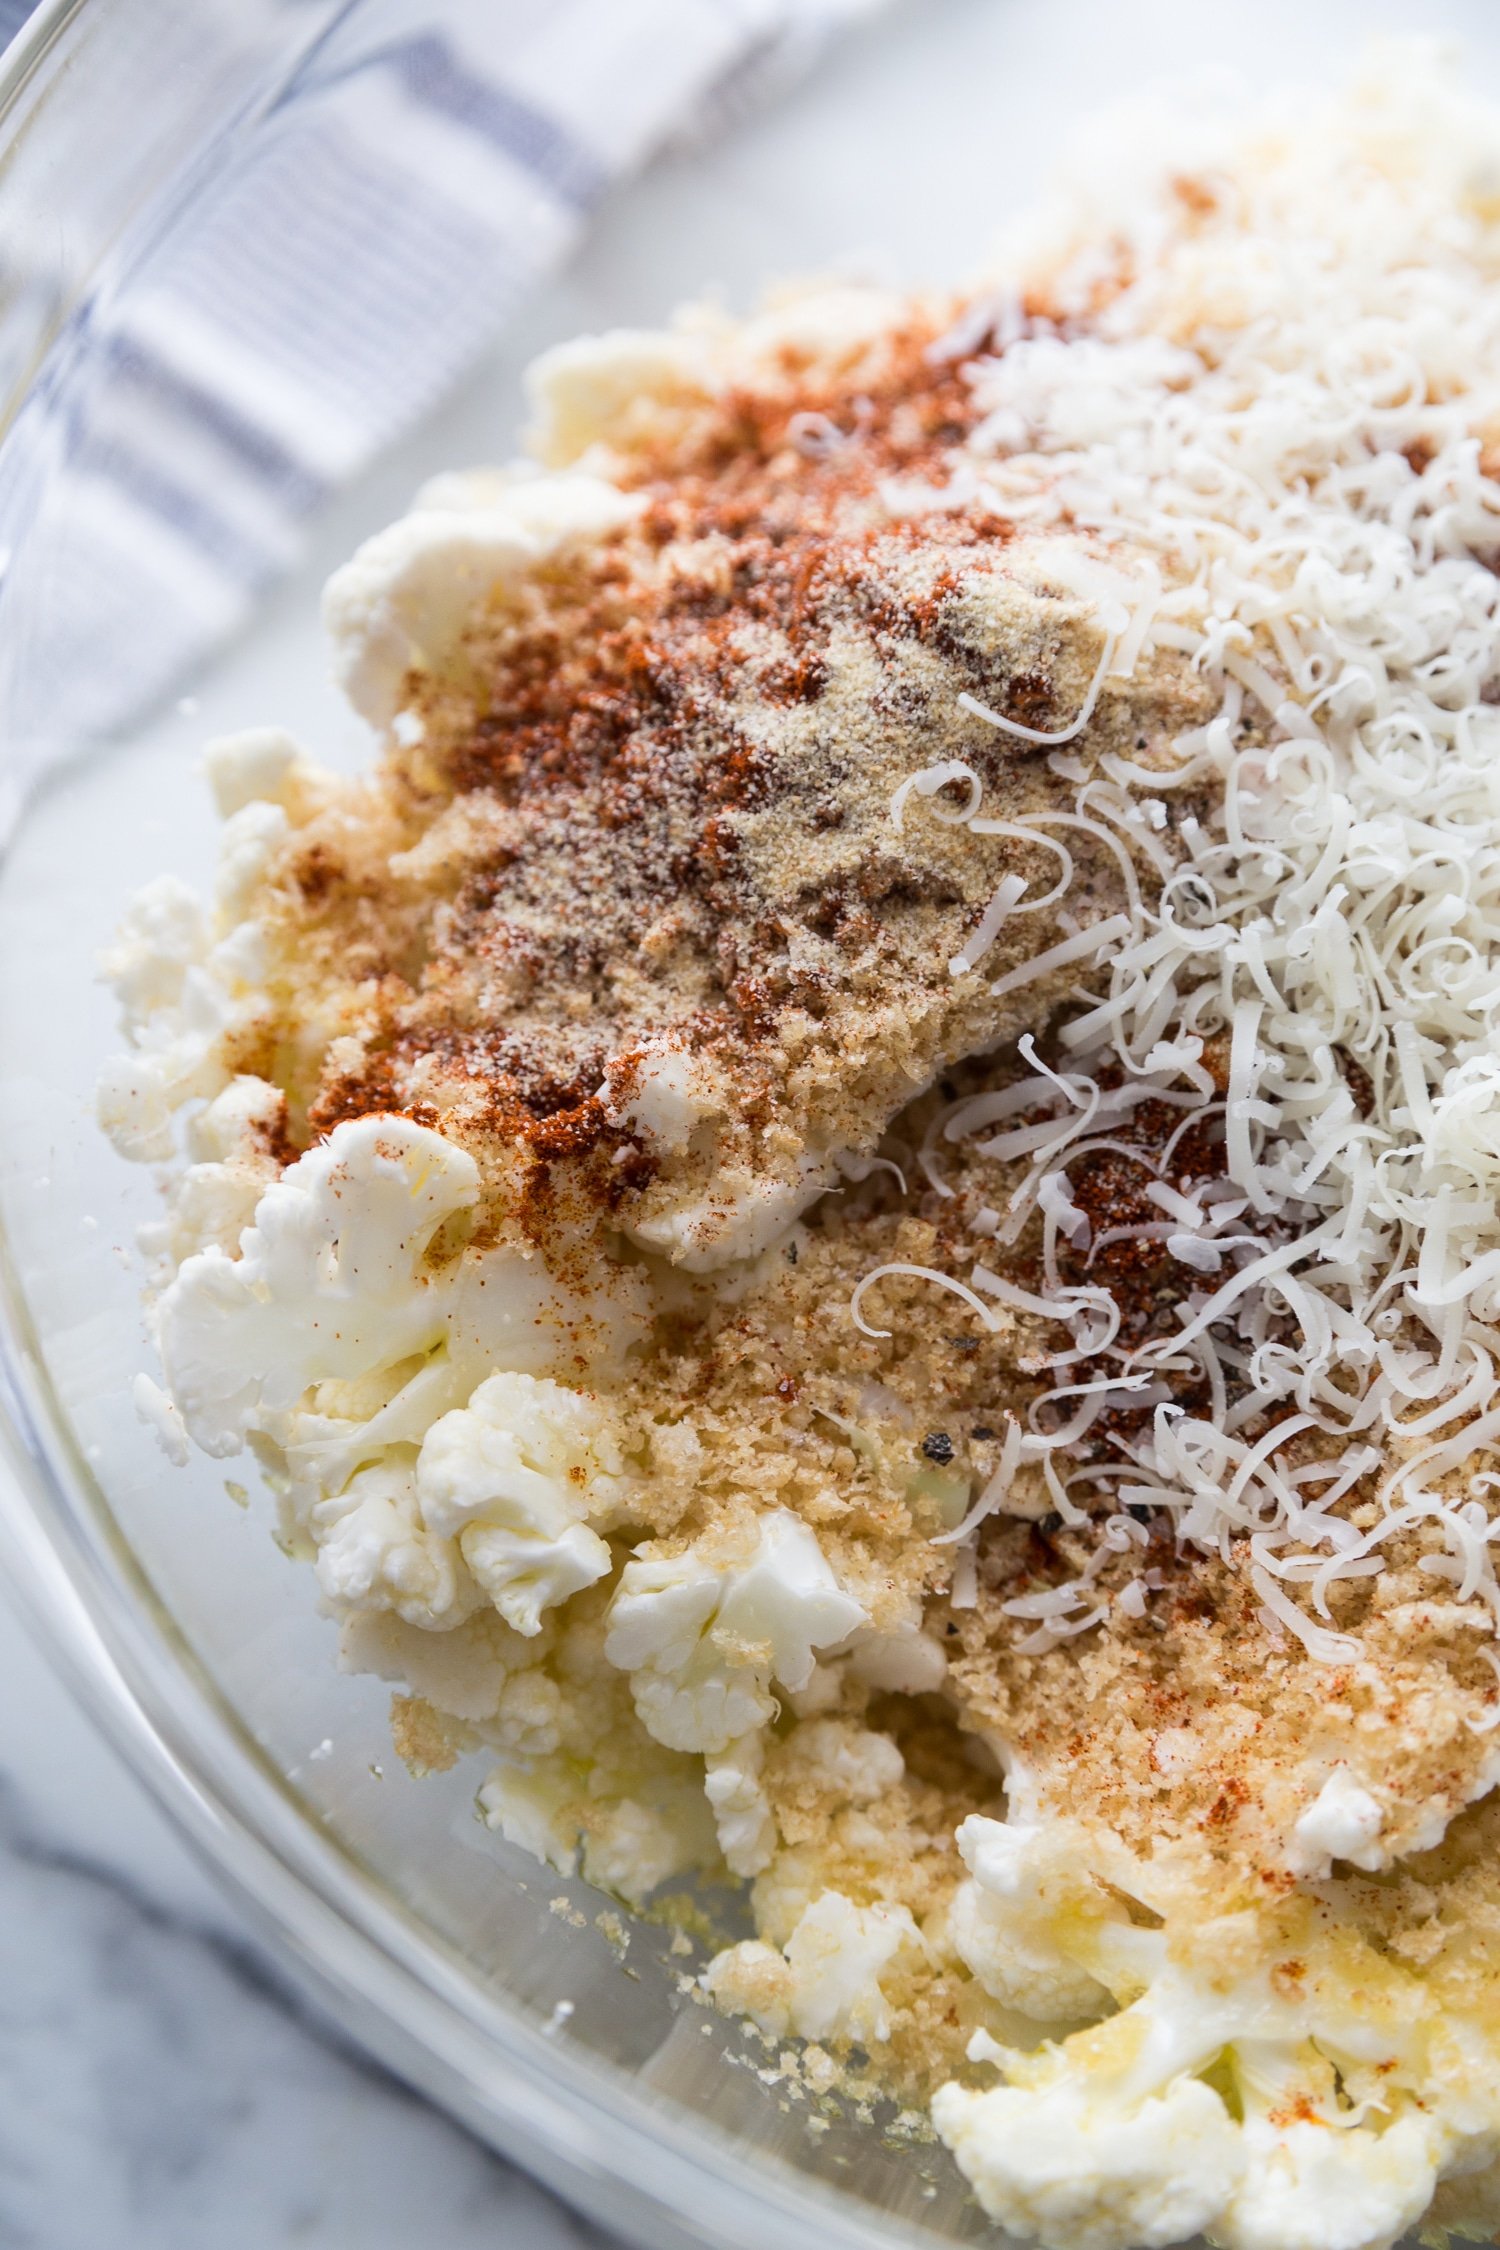 Cauliflower florets being mixed with pork panco bread crumbs, olive oil, parmesan cheese, and spices.